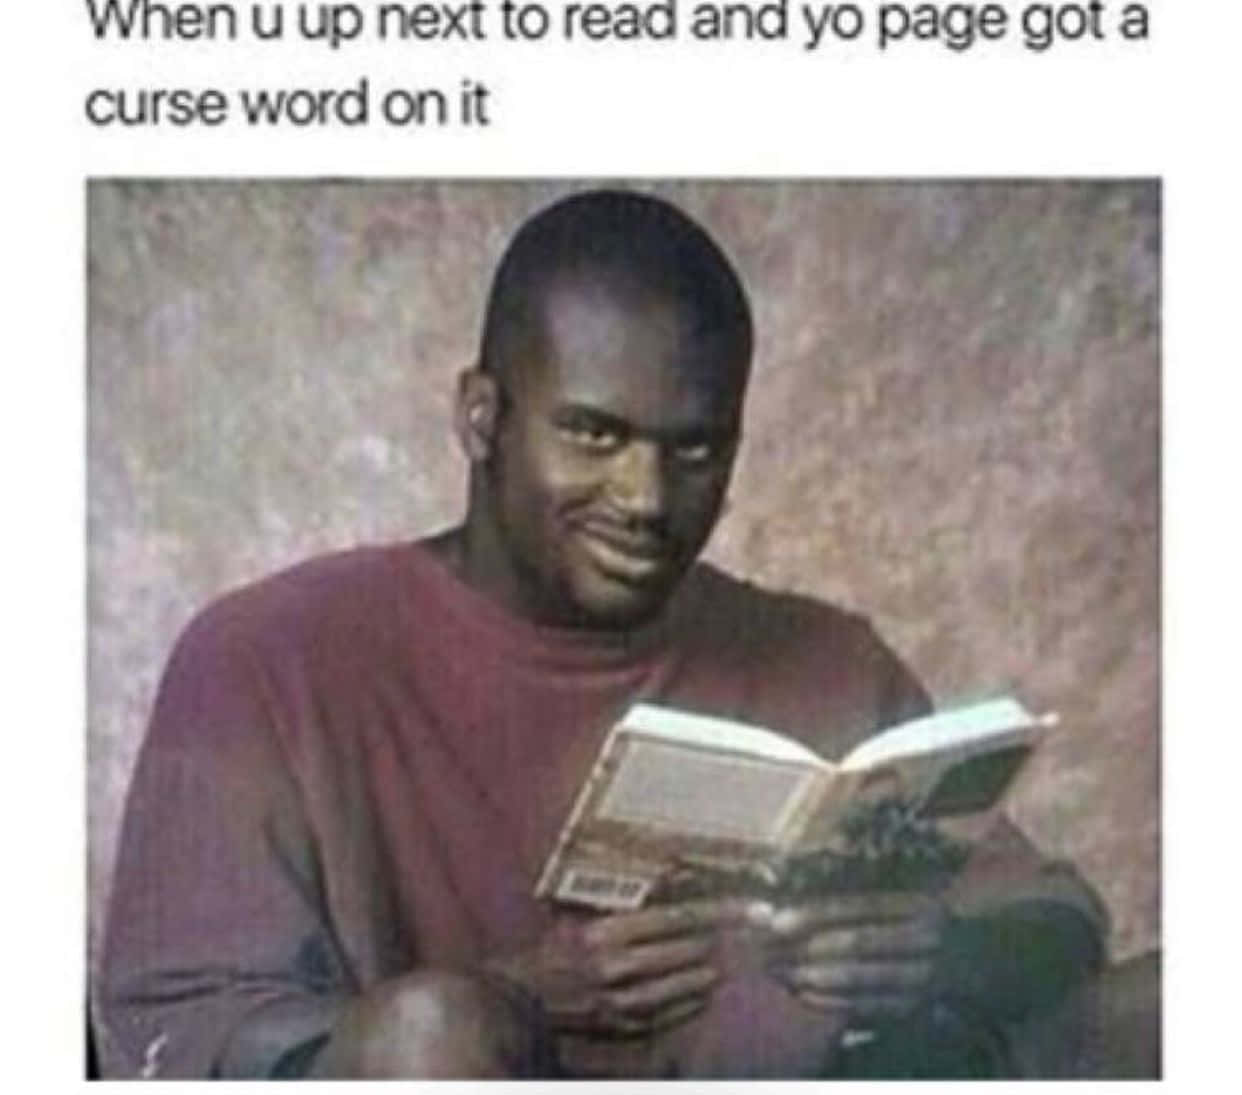 A Man Reading A Book With The Caption When Next To Read Yo Page A Curse Word On It